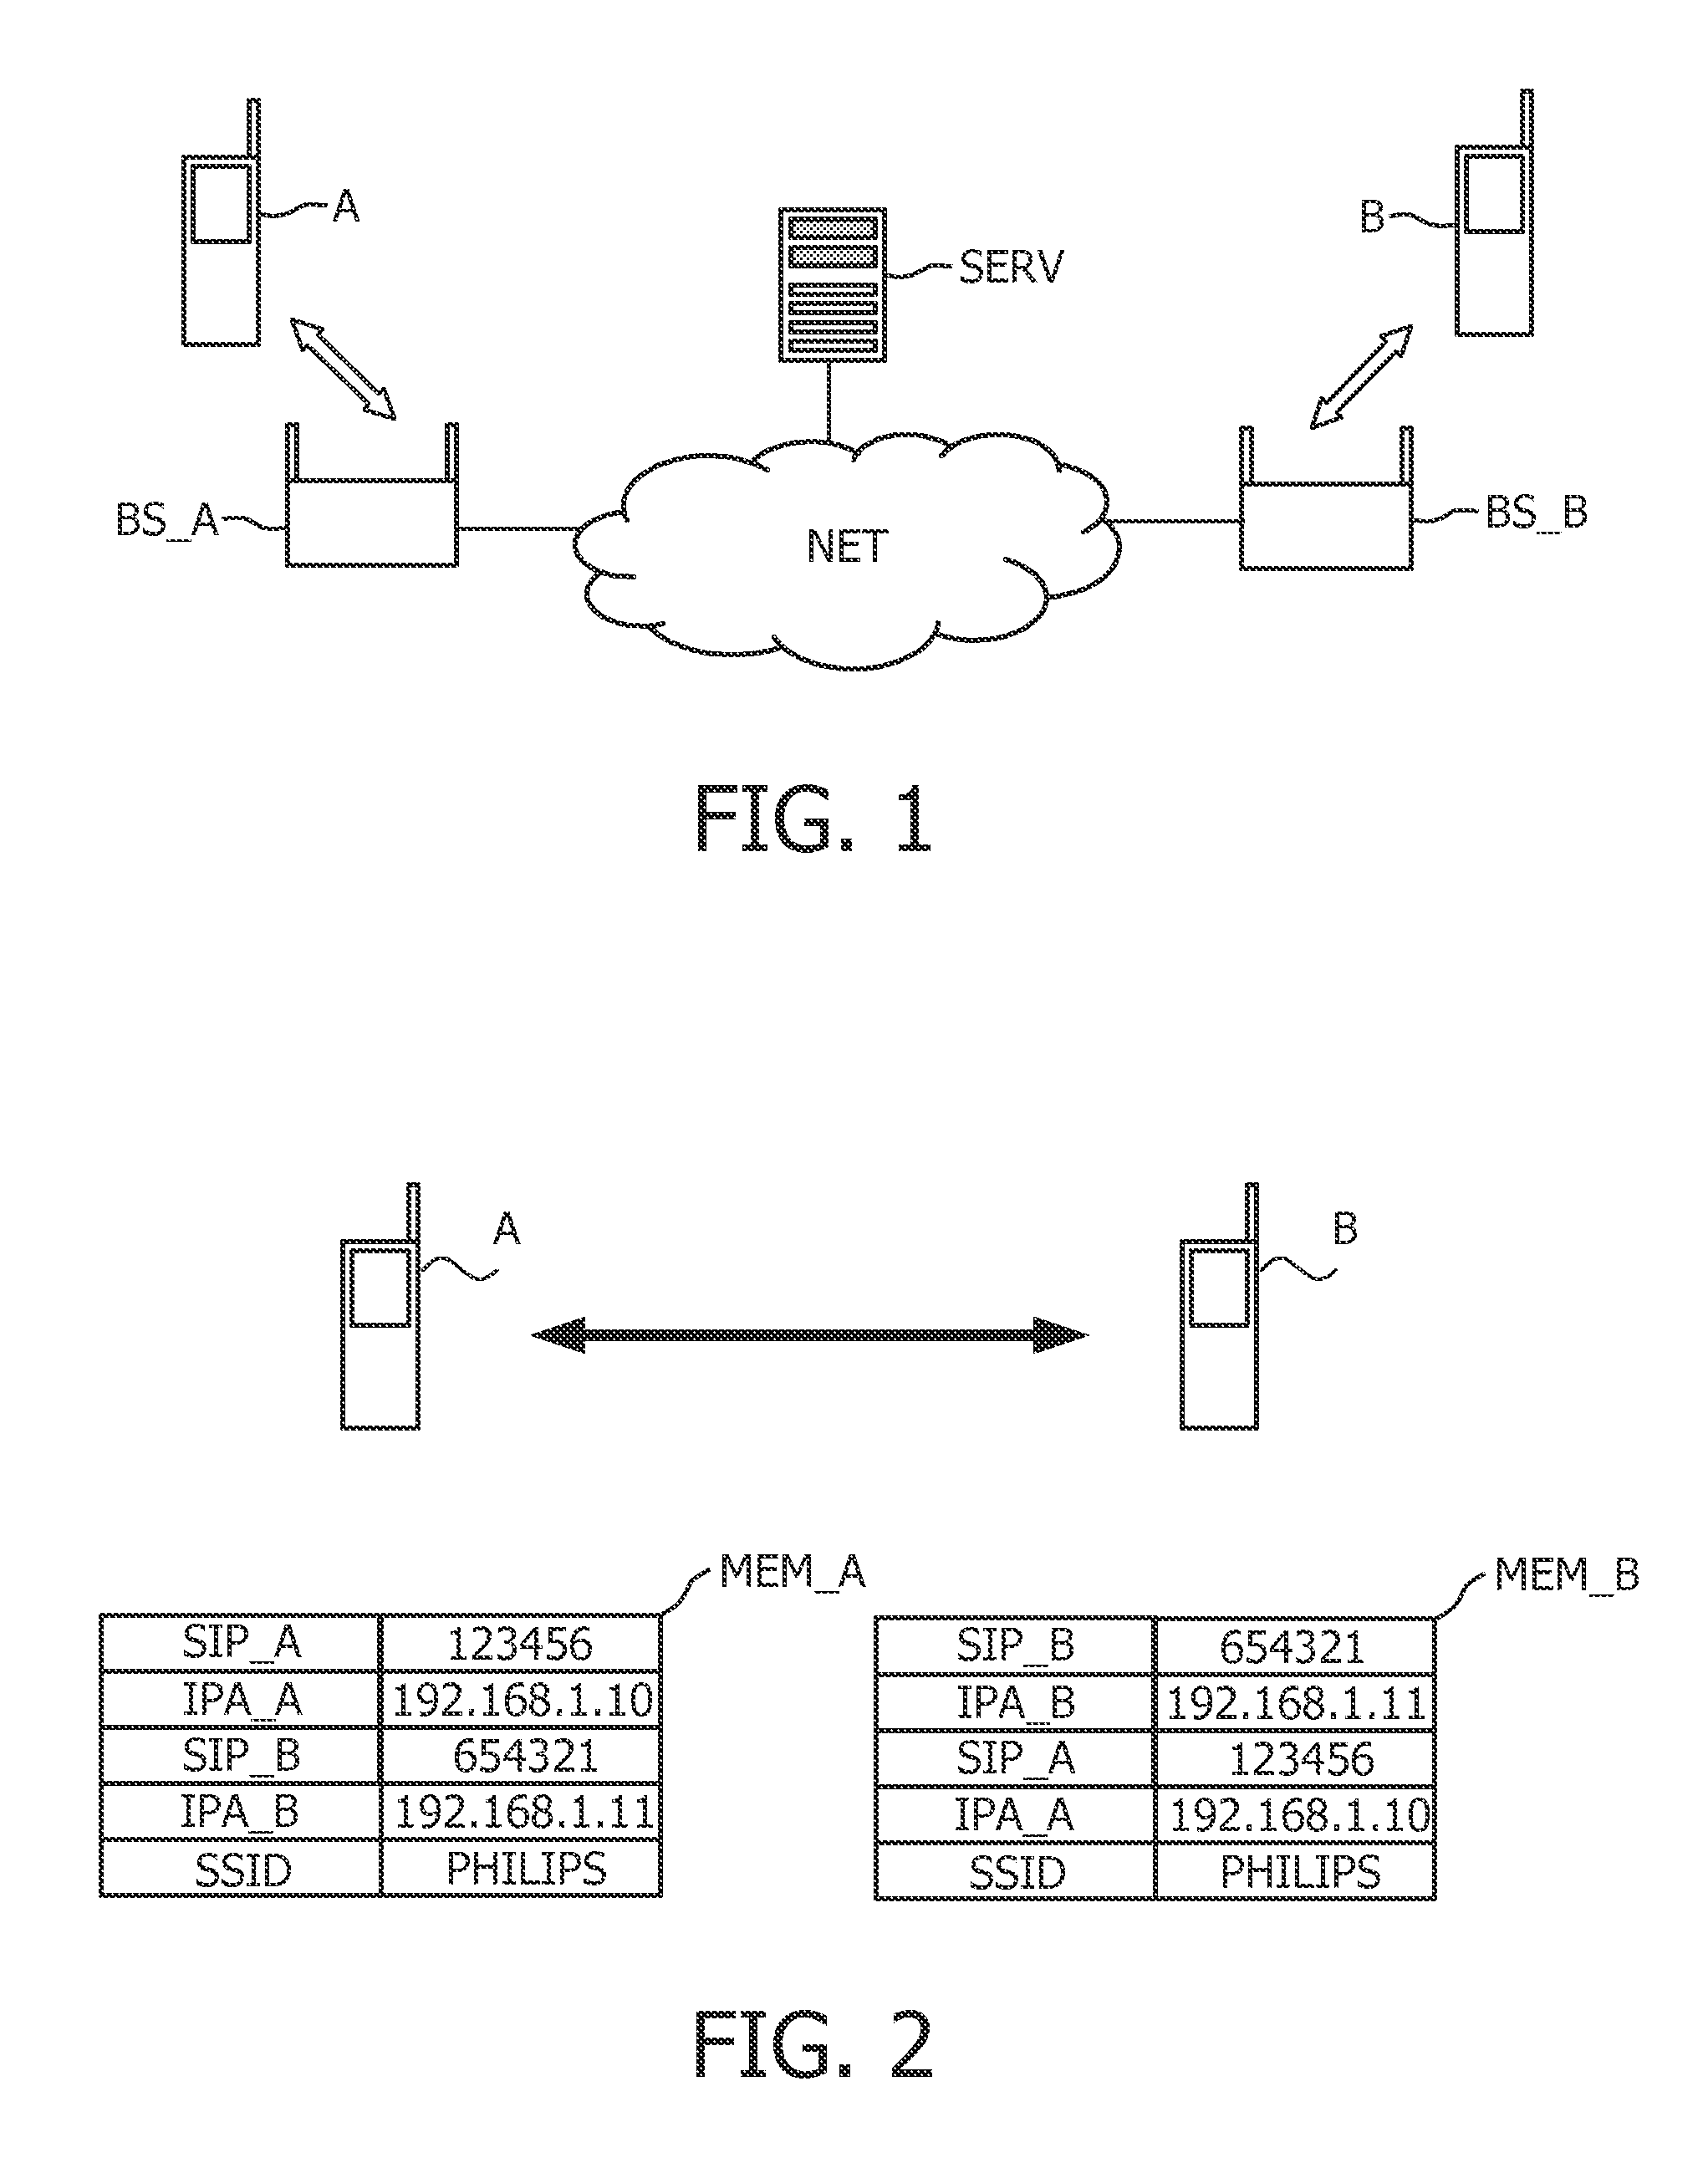 Method of establishing a direct communication between a first wireless phone and a second wireless phone